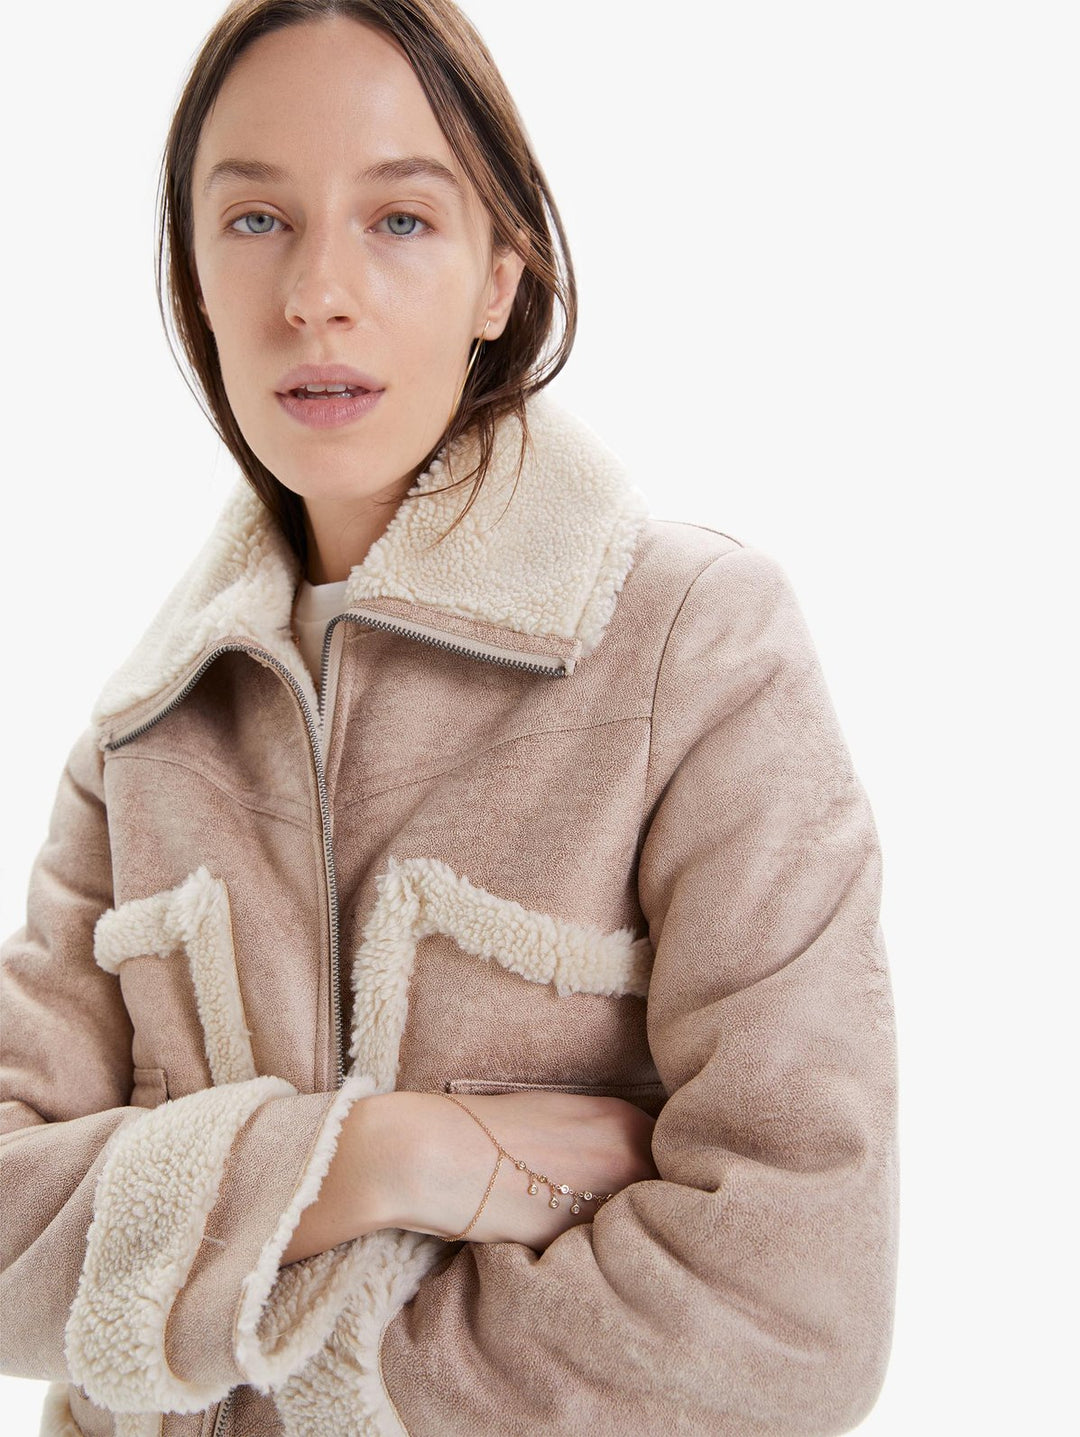 Mother - The Patch Pocket Roamer Jacket in Lucky Penny